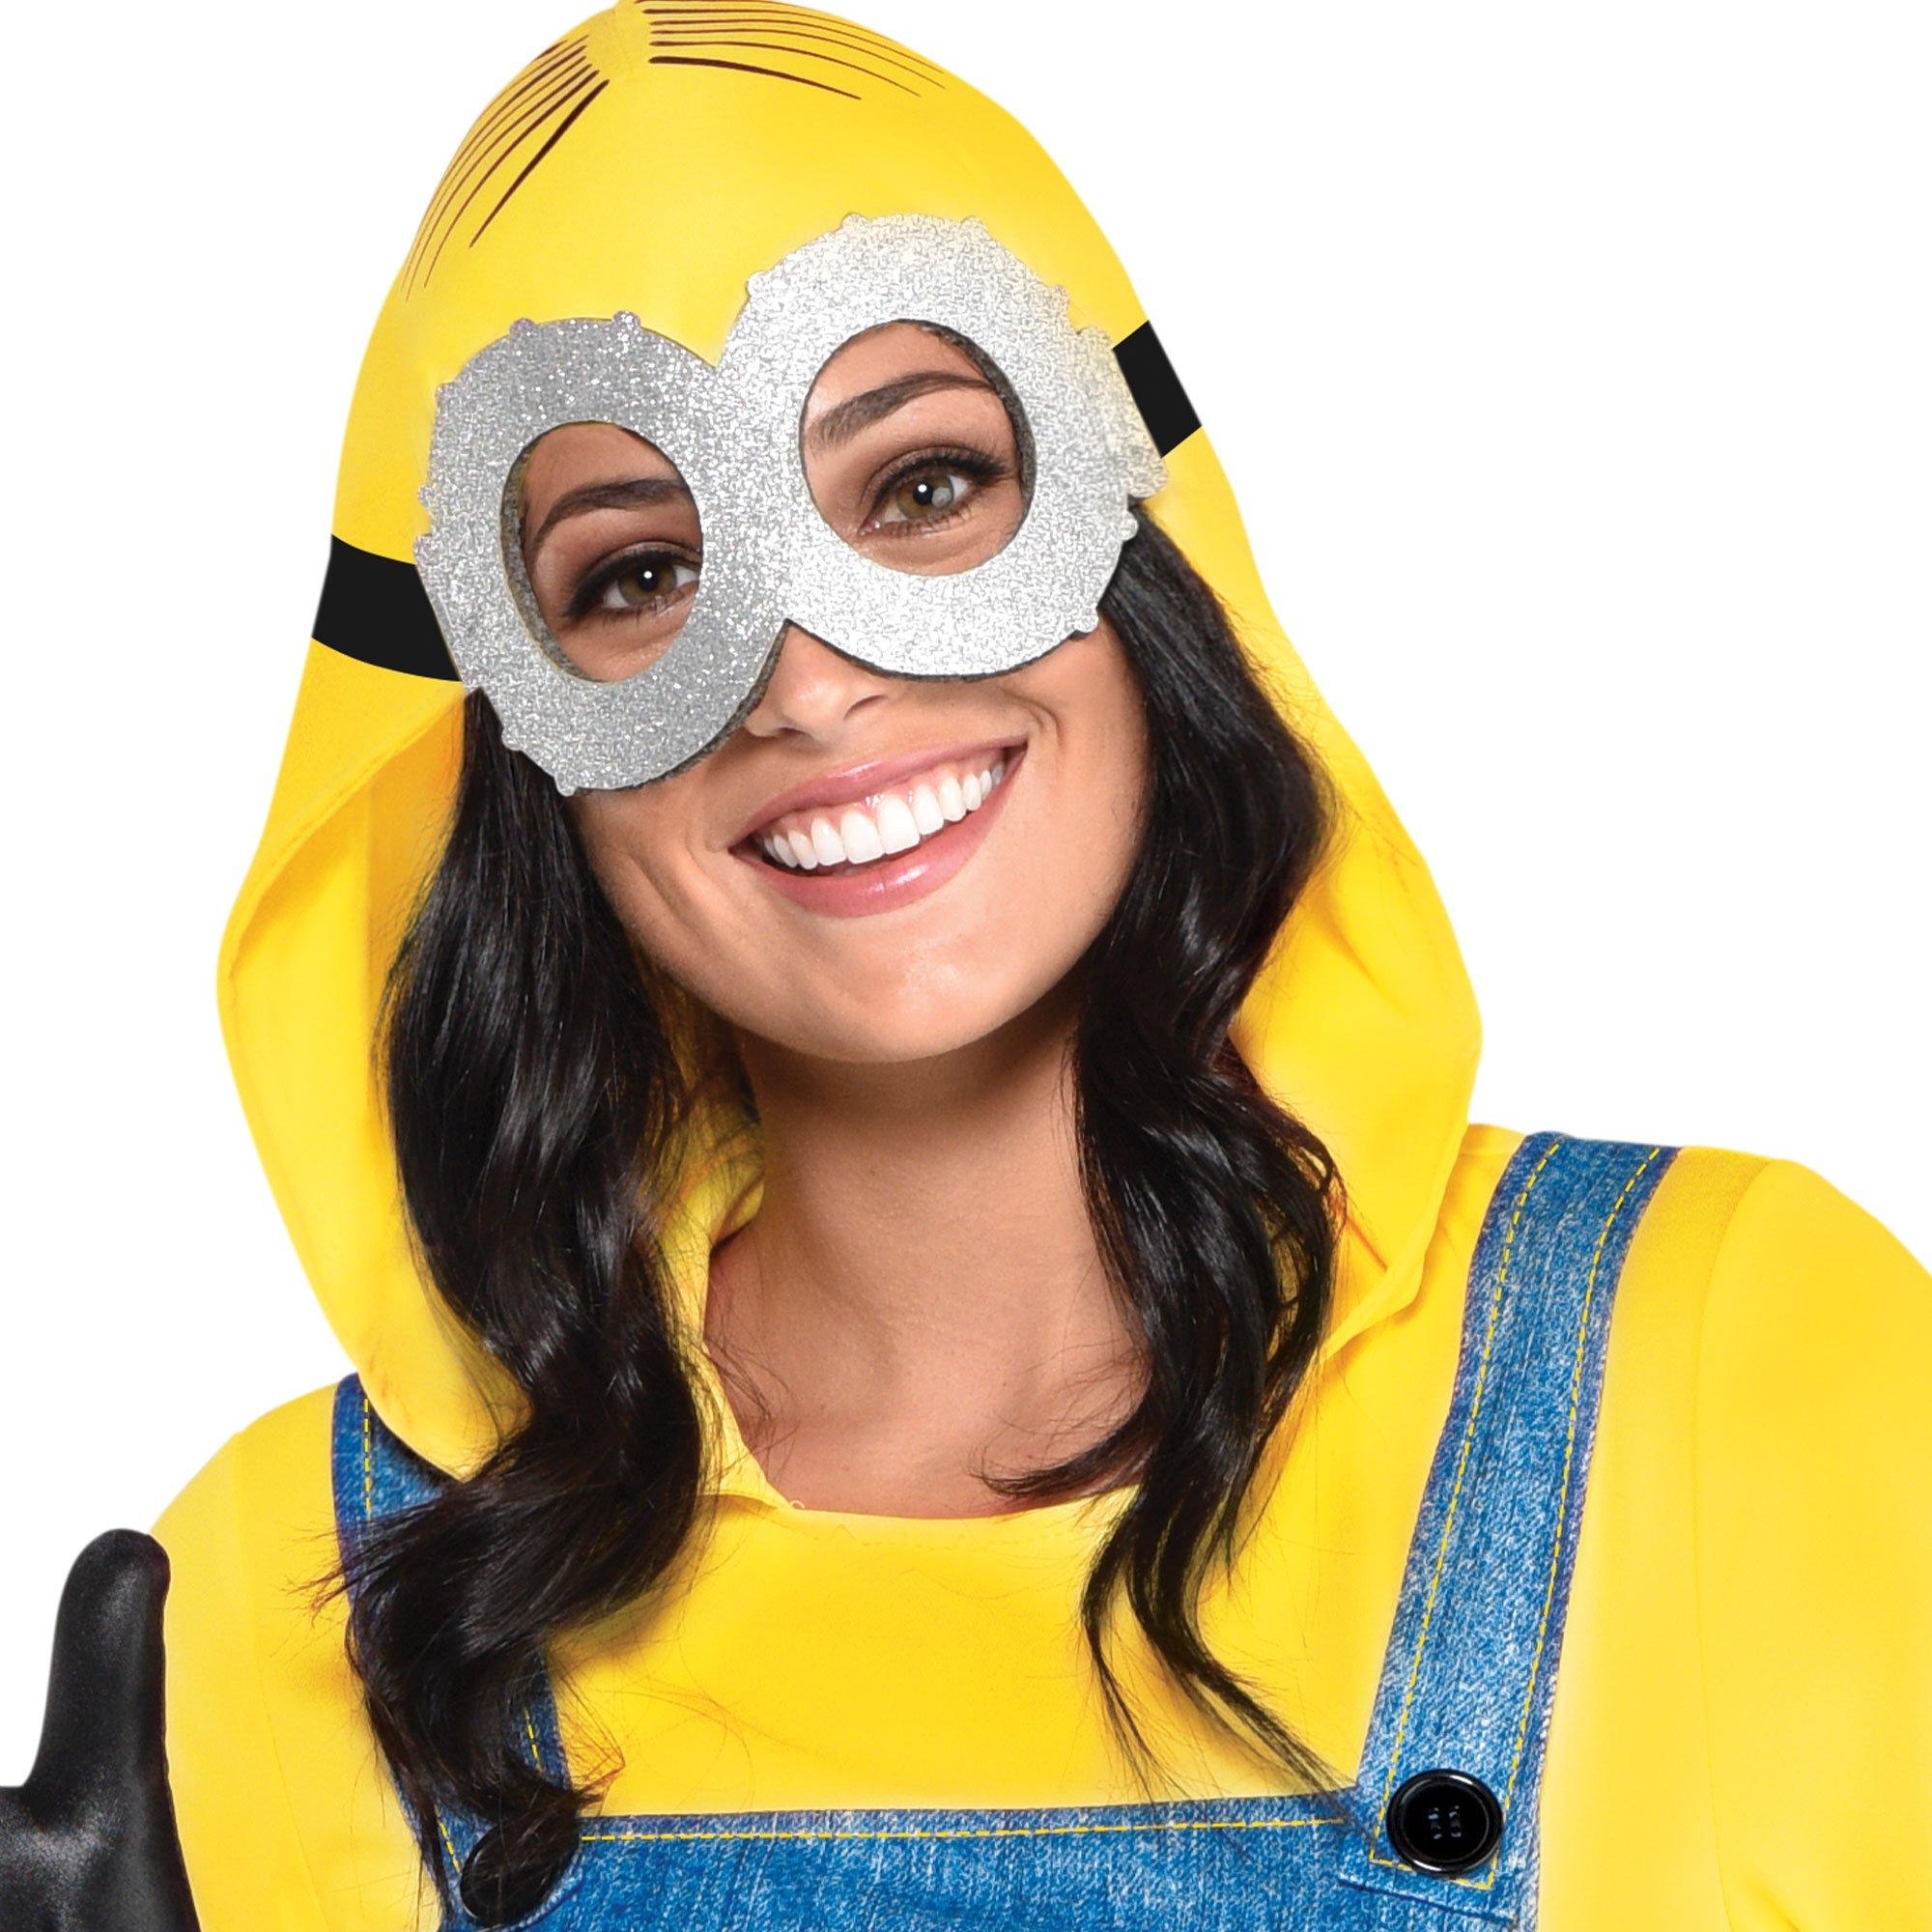 Party City Minion Halloween Costume for Women, Minions: The Rise of Gru,  Jumpsuit, Goggles and Gloves